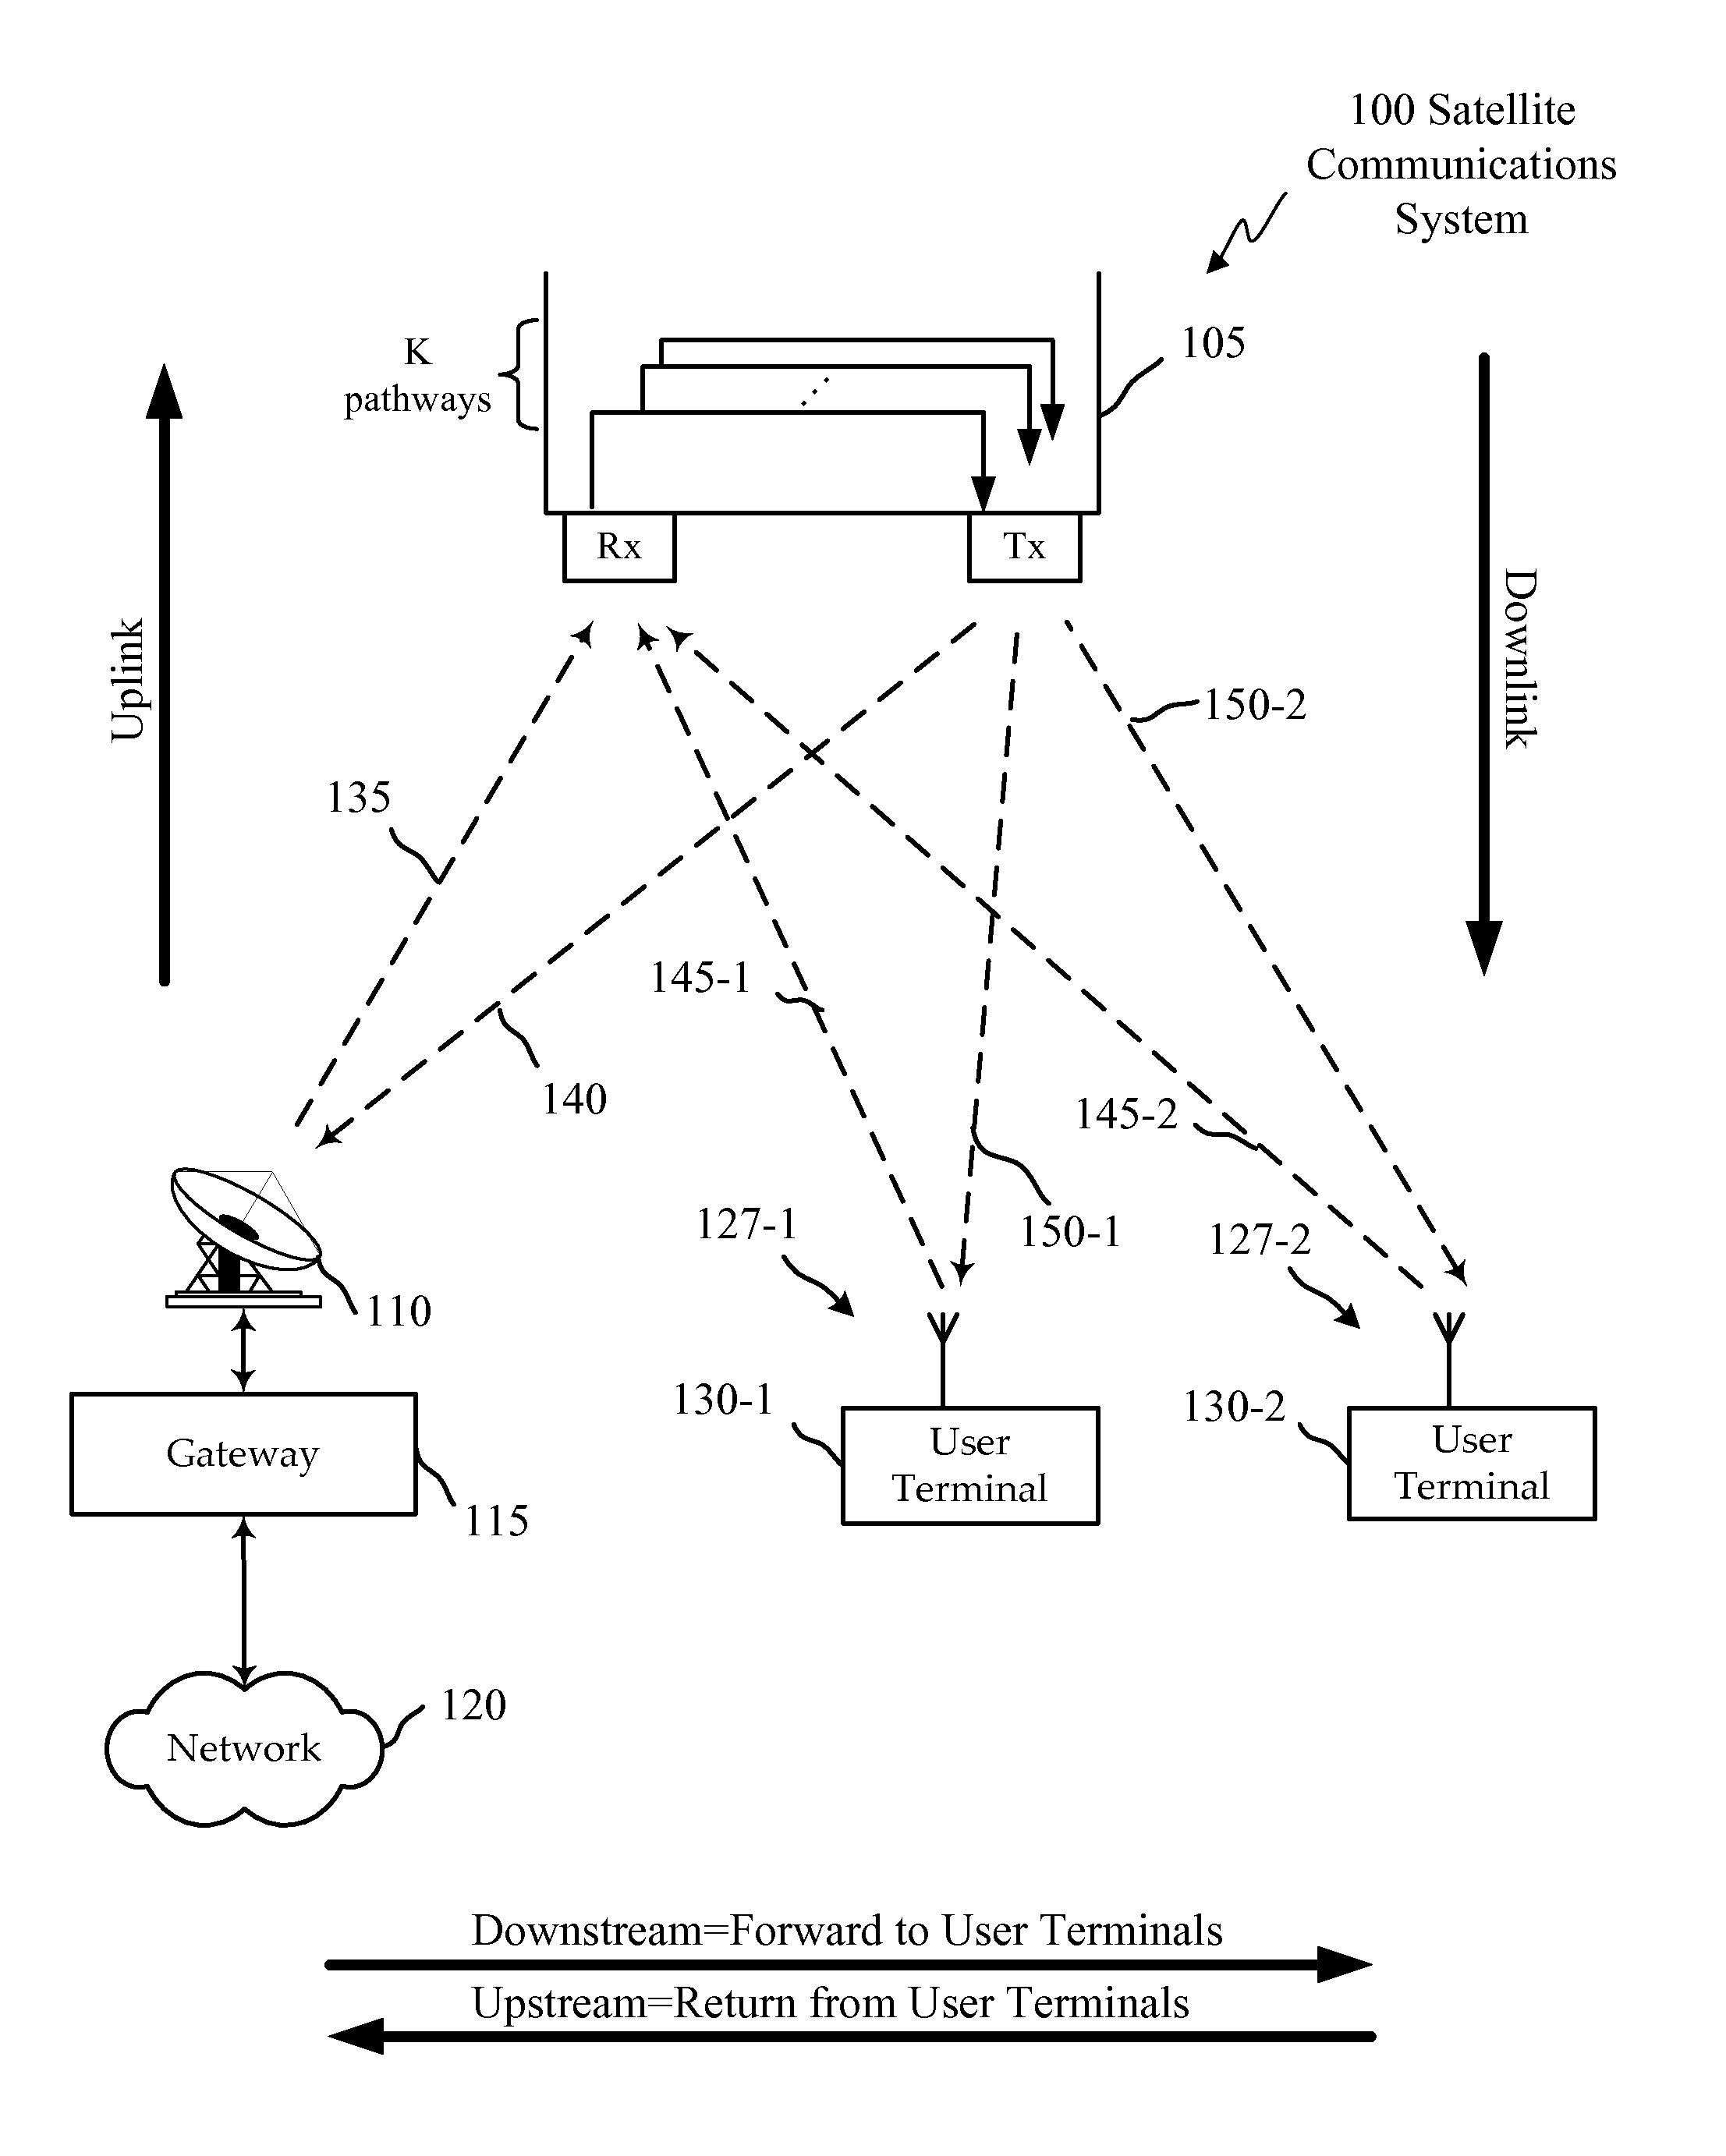 Flexible capacity satellite communications system with dynamic distribution and coverage areas